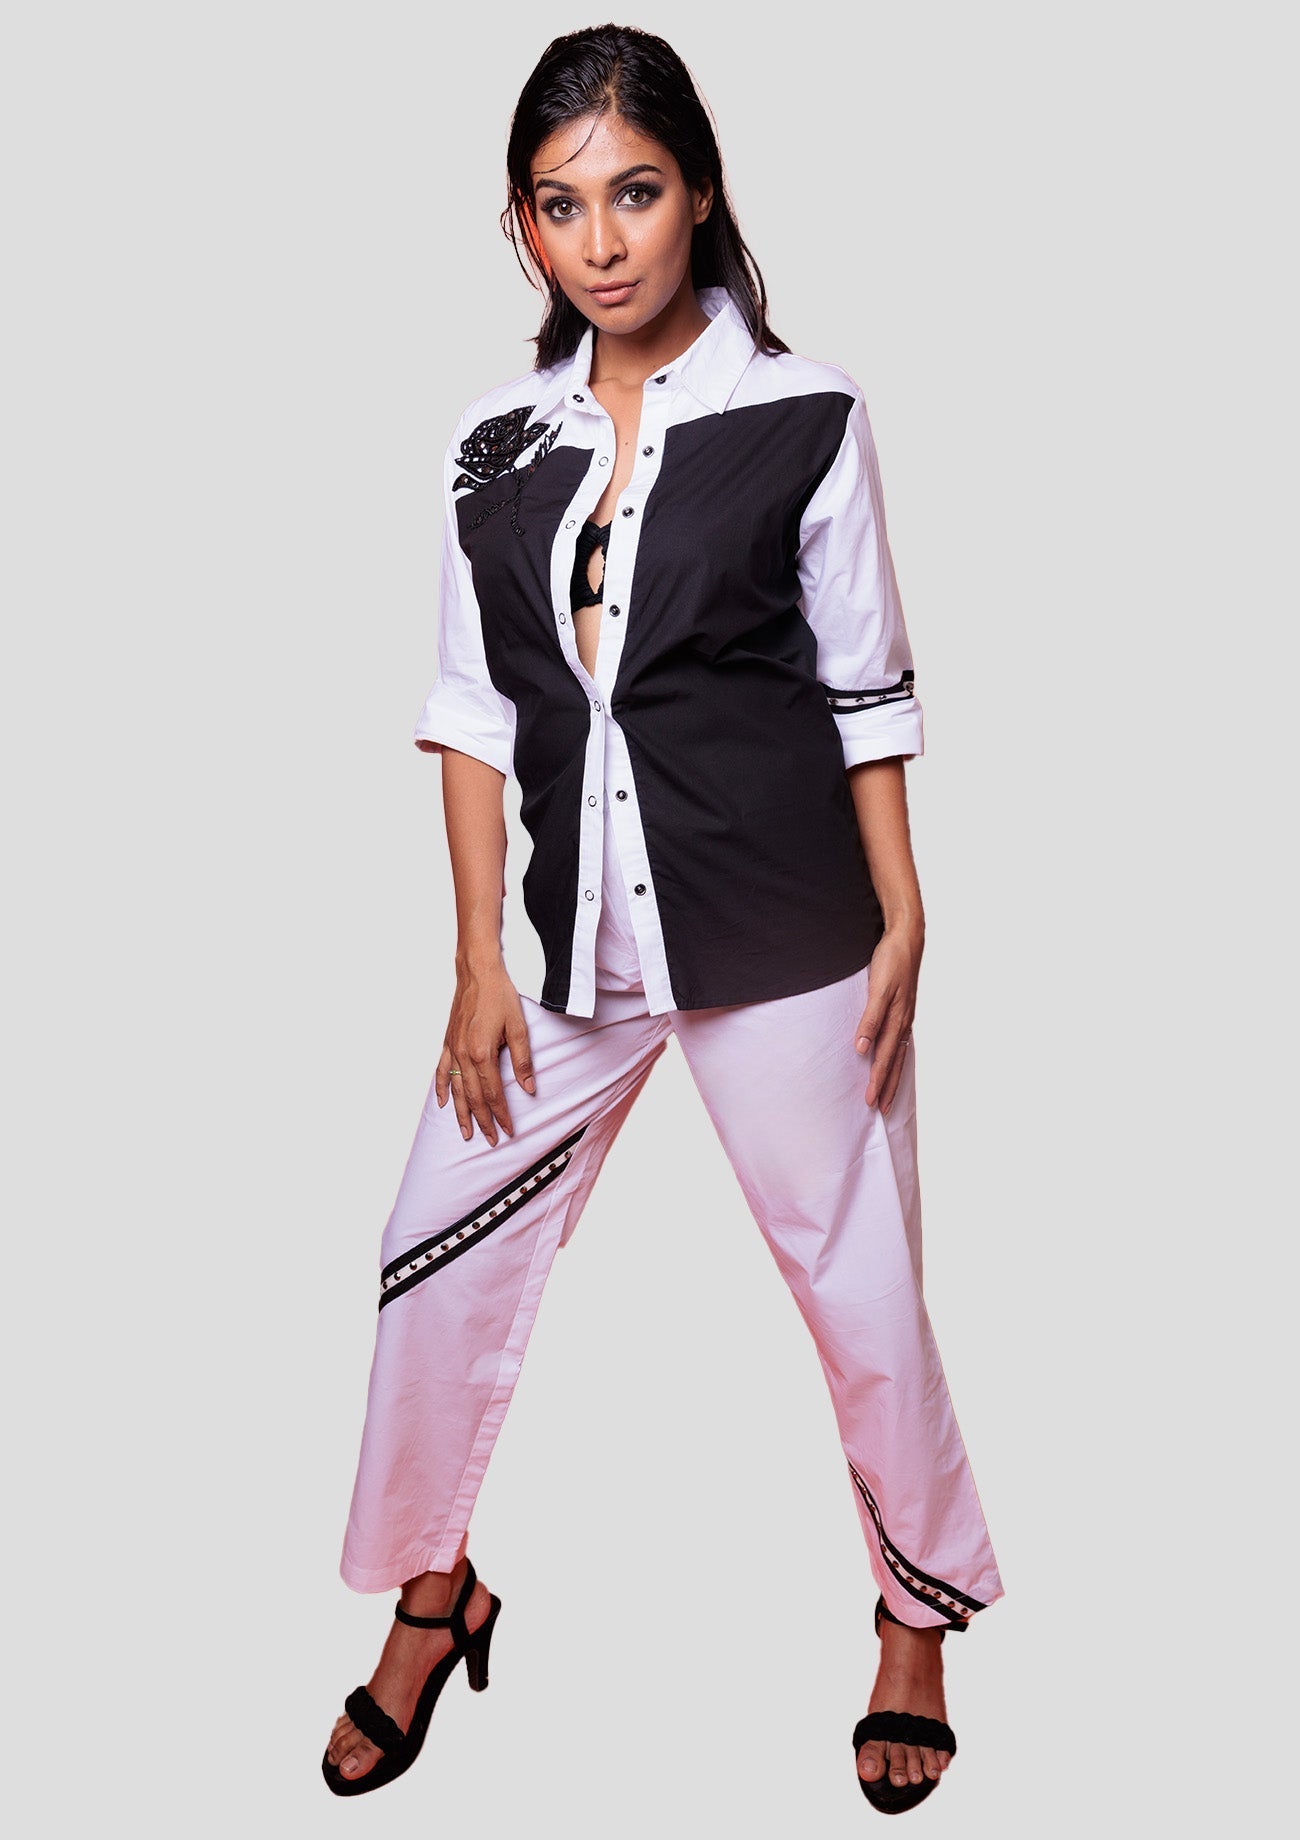 Black & White Cotton Shirt With Cutwork Rose Embroidery, With White Straightcotton Pants With Embellished Tape